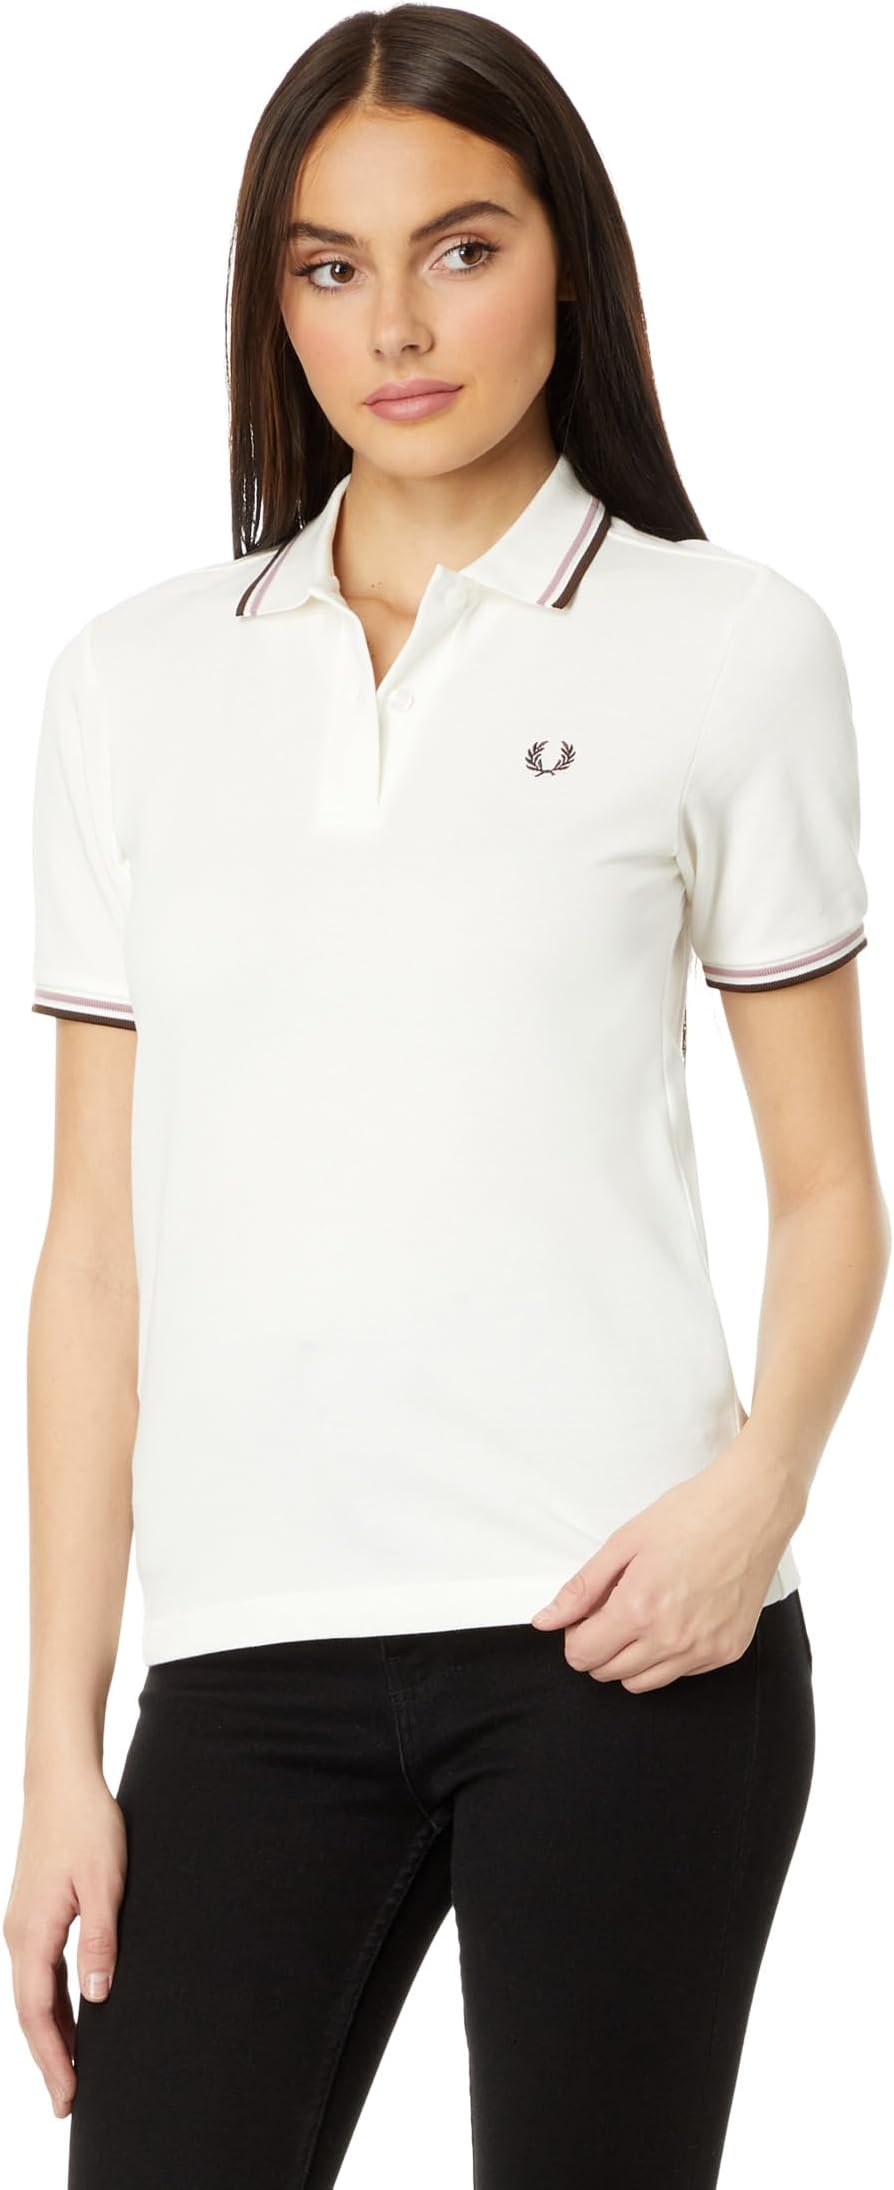 Рубашка-поло Twin Tipped Fred Perry Shirt Fred Perry, цвет Snow White поло fred perry twin tipped цвет black snow